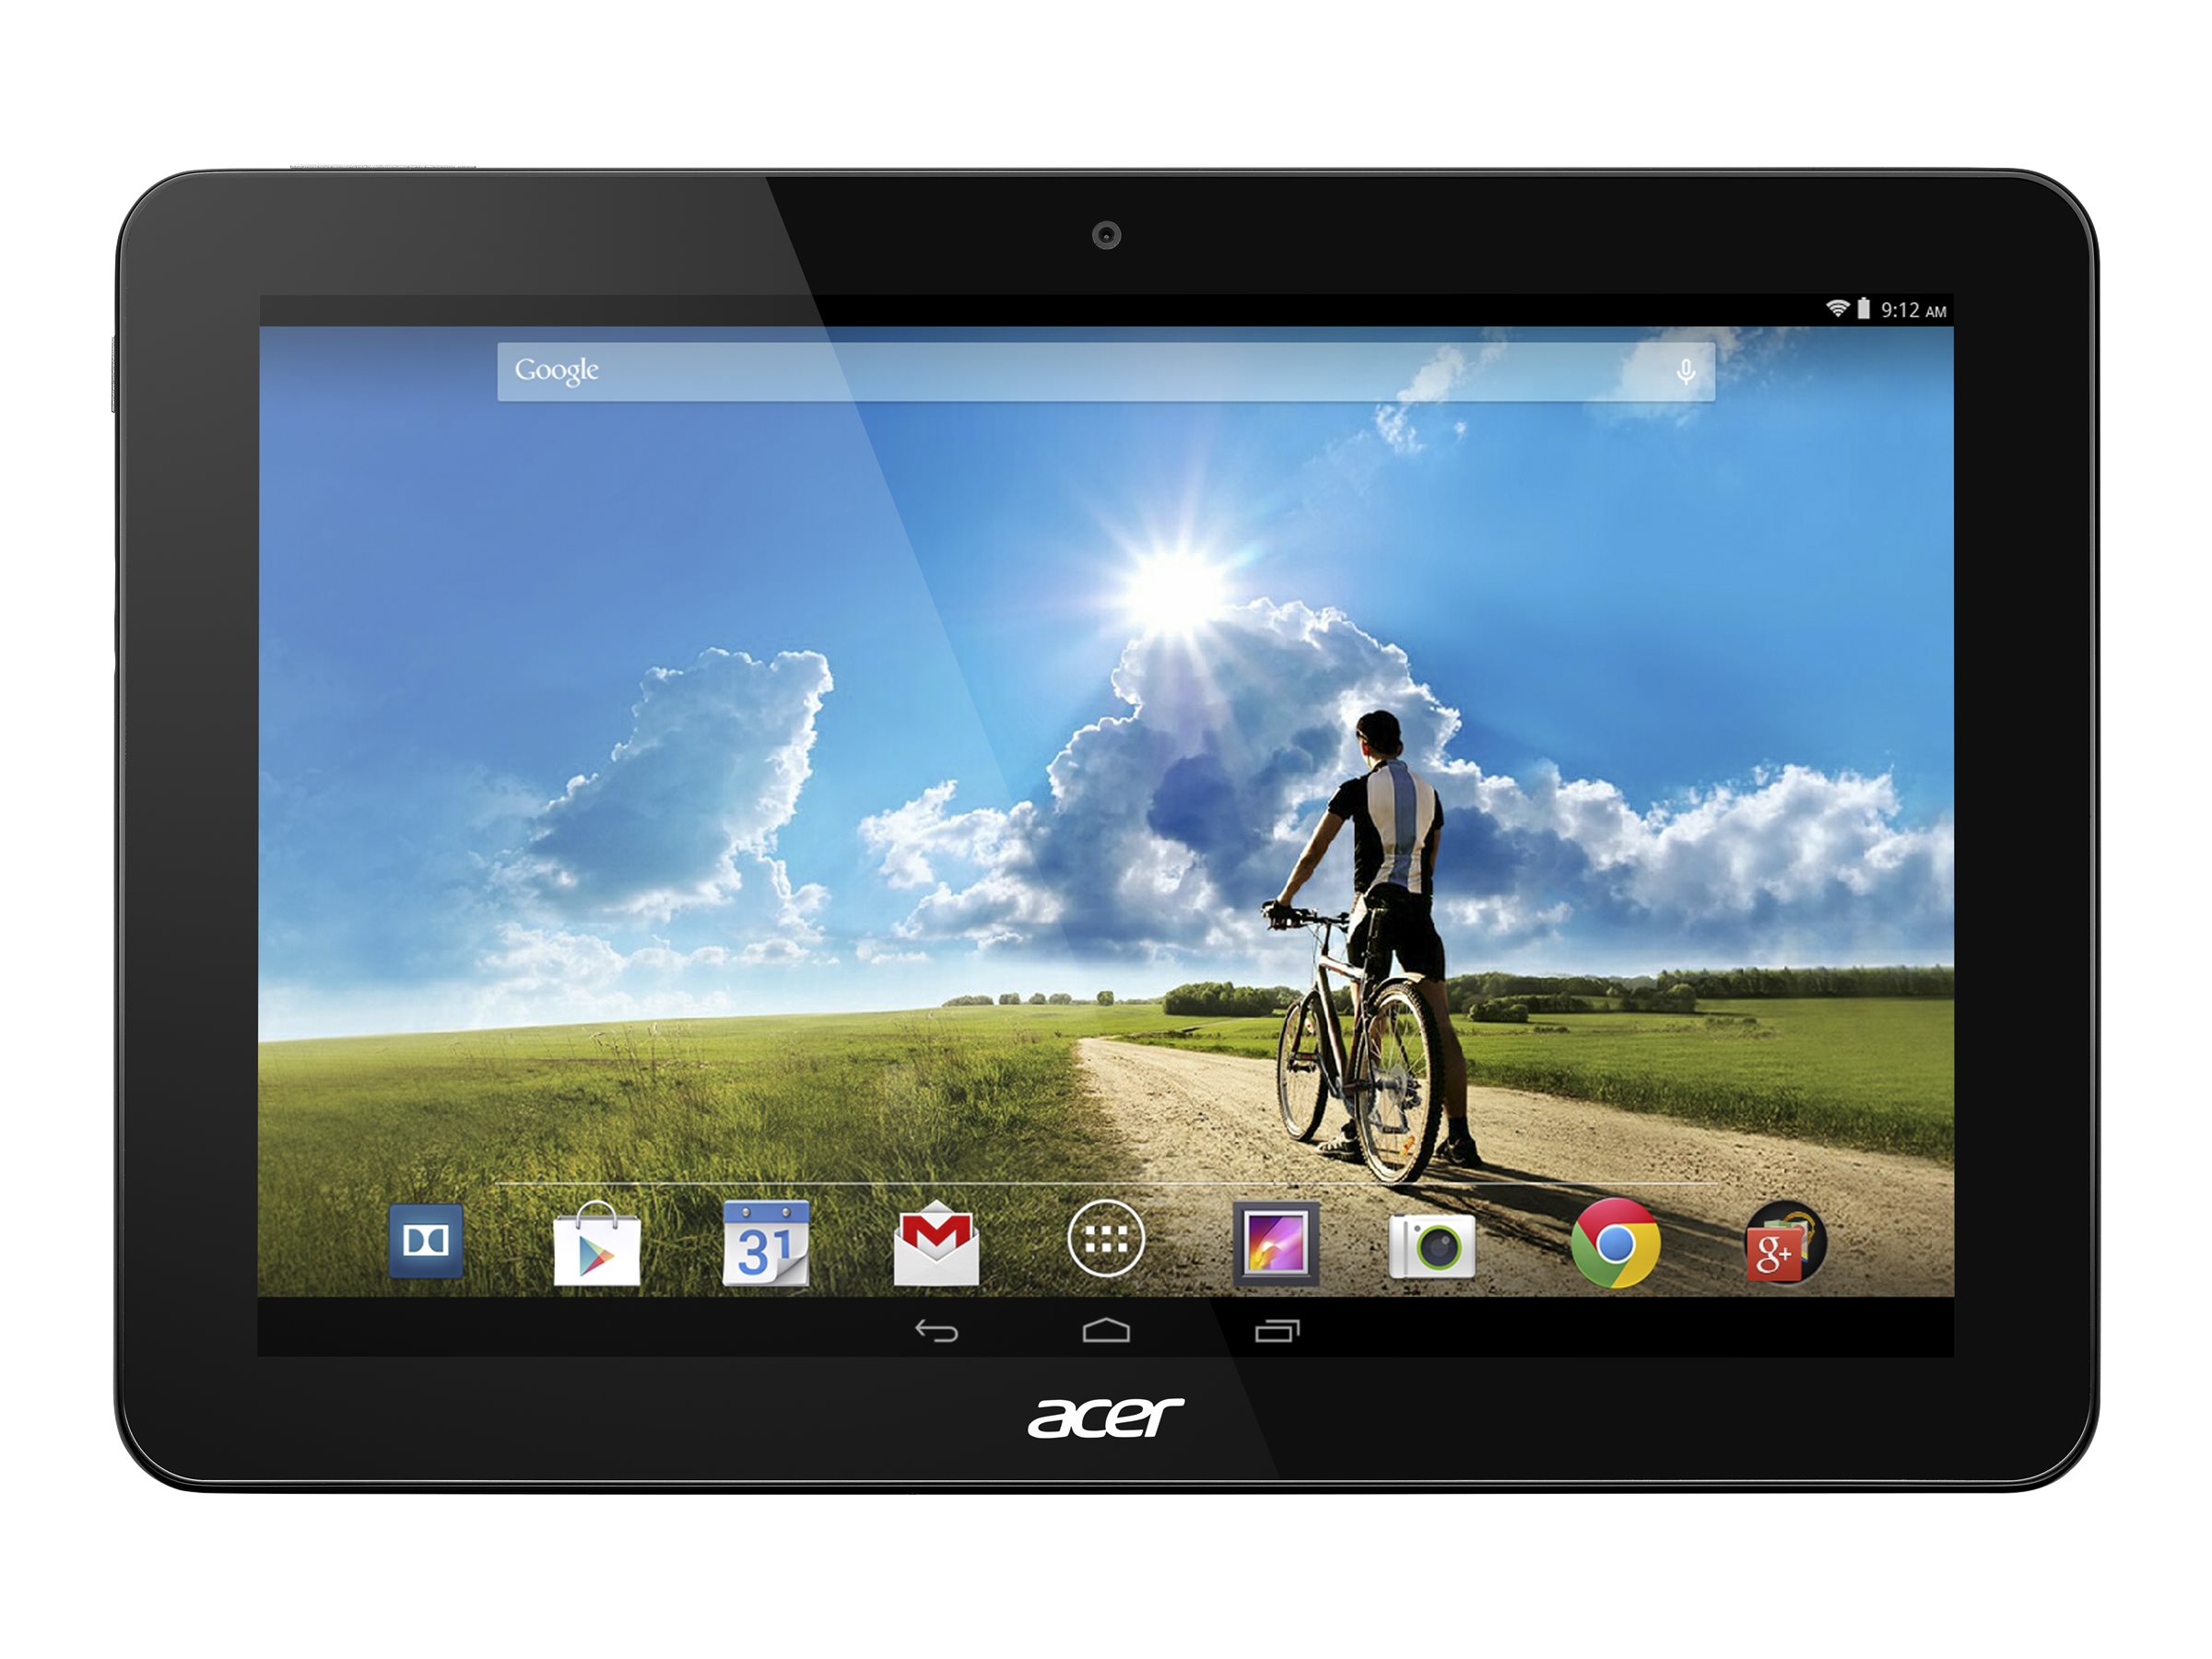 Acer ICONIA A3-A20 A3-A20-K19H Tablet, 10.1" WXGA, Cortex A7 Quad-core (4 Core) 1.30 GHz, 1 GB RAM, 16 GB Storage, Android 4.4 KitKat - image 2 of 13